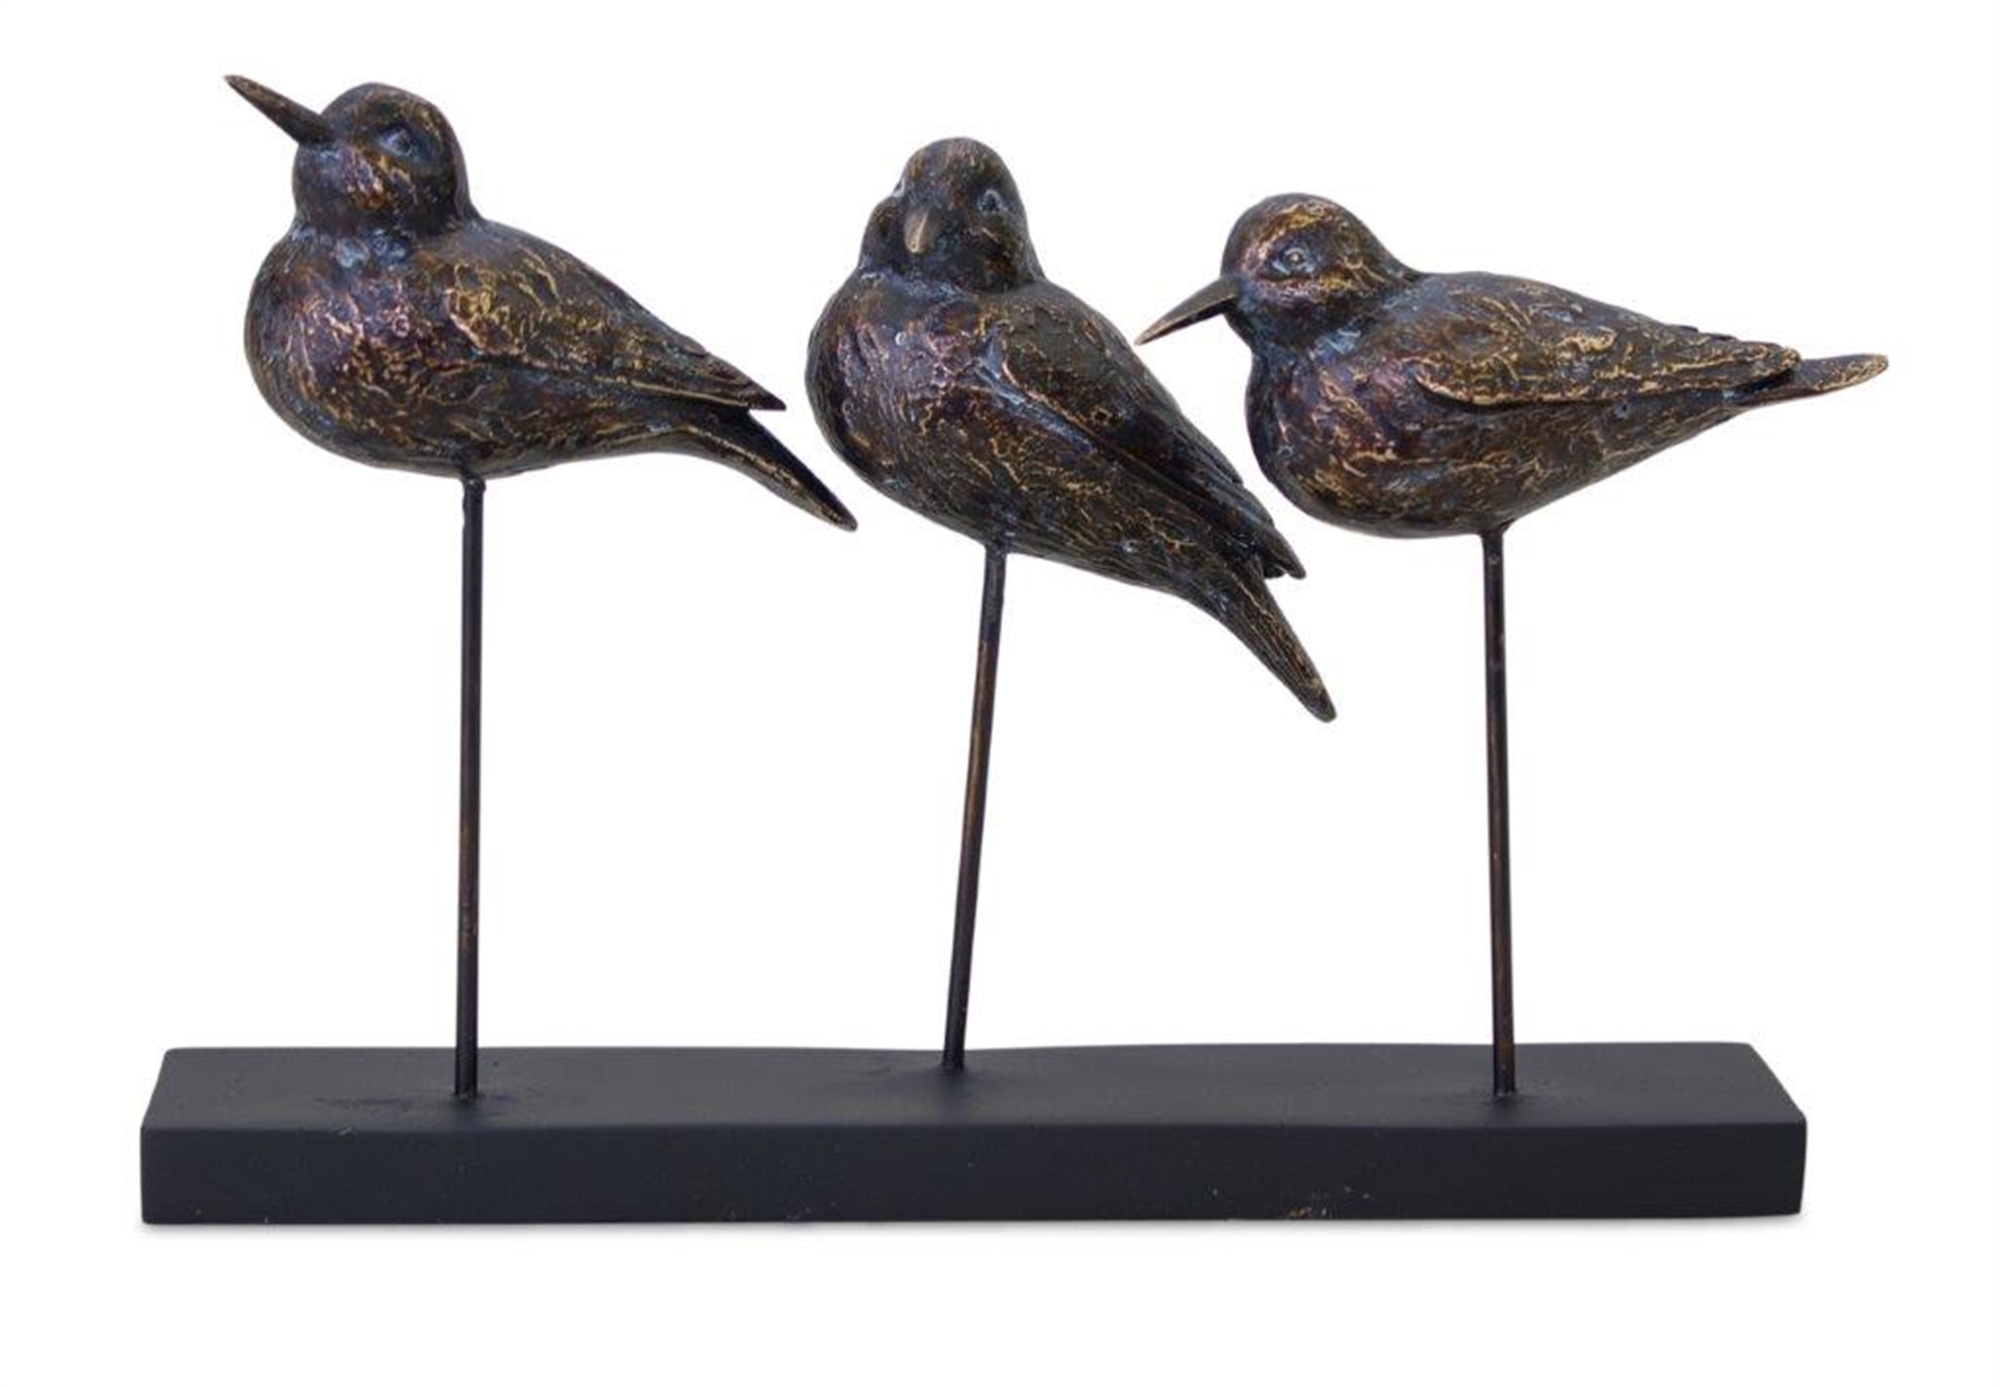 Birds on Stand 9.75"L x 6.75"H Resin